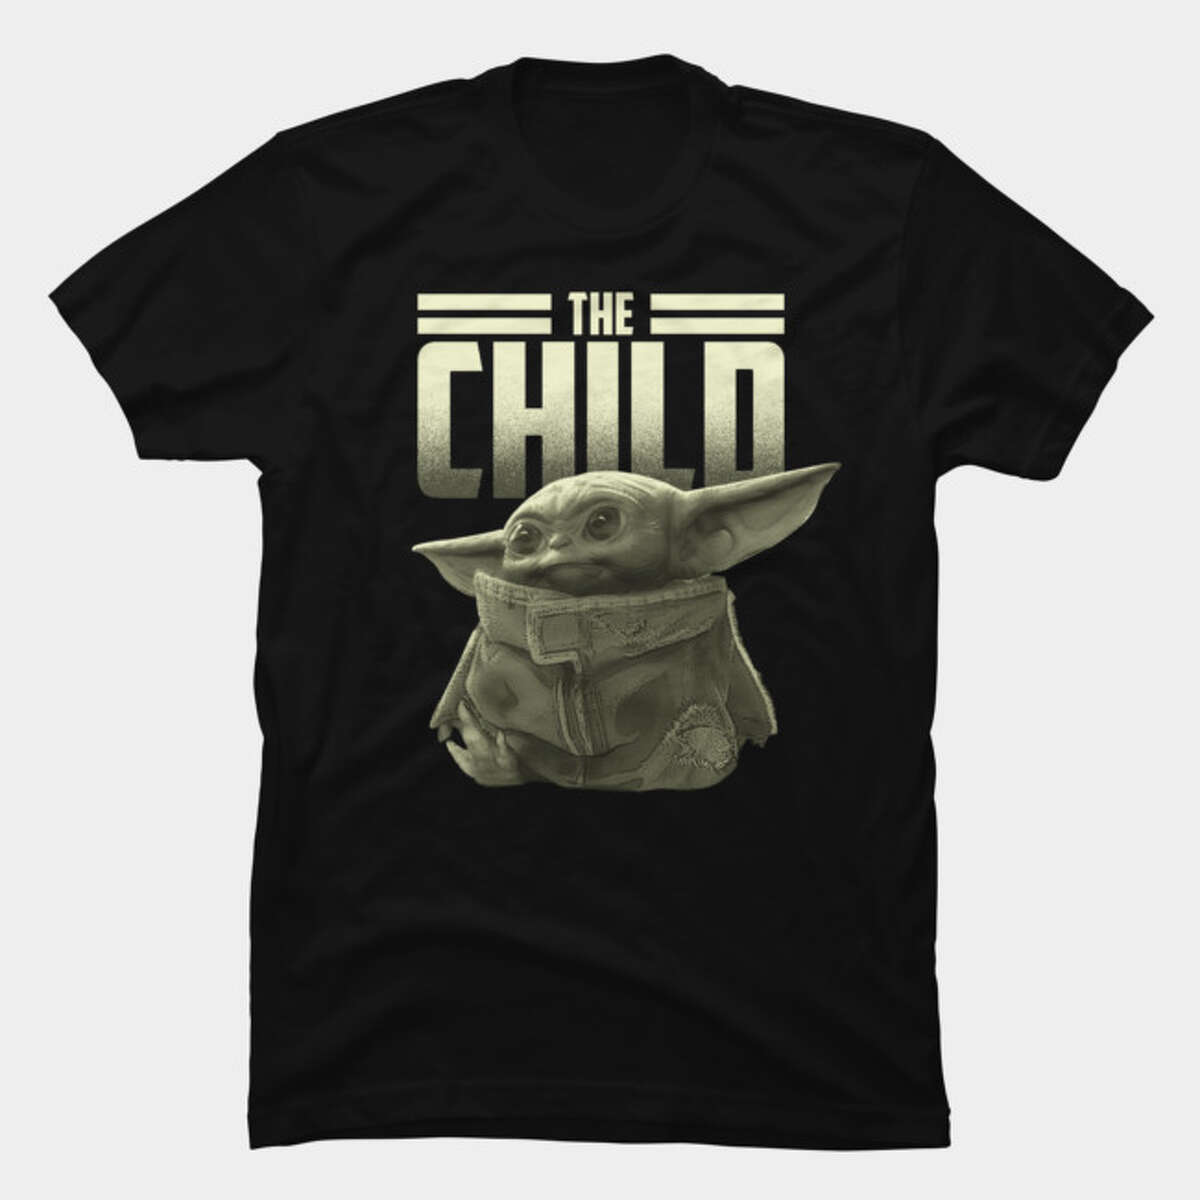 Baby Yoda dolls, figurines and t-shirts are now for sale